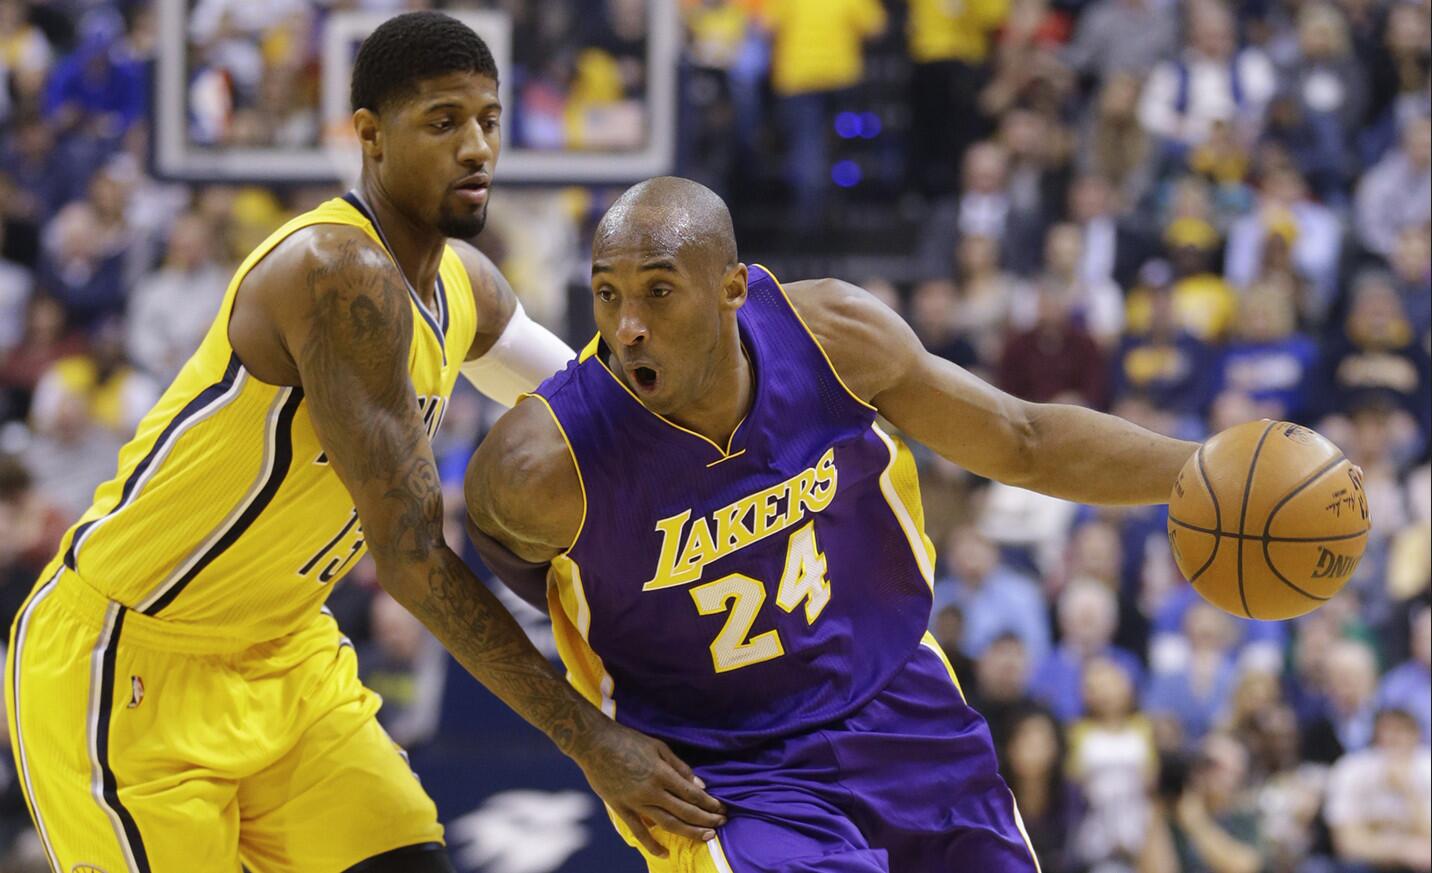 Kobe Bryant gets hot then cools off in final minutes of Lakers' 89-87 loss to Pacers